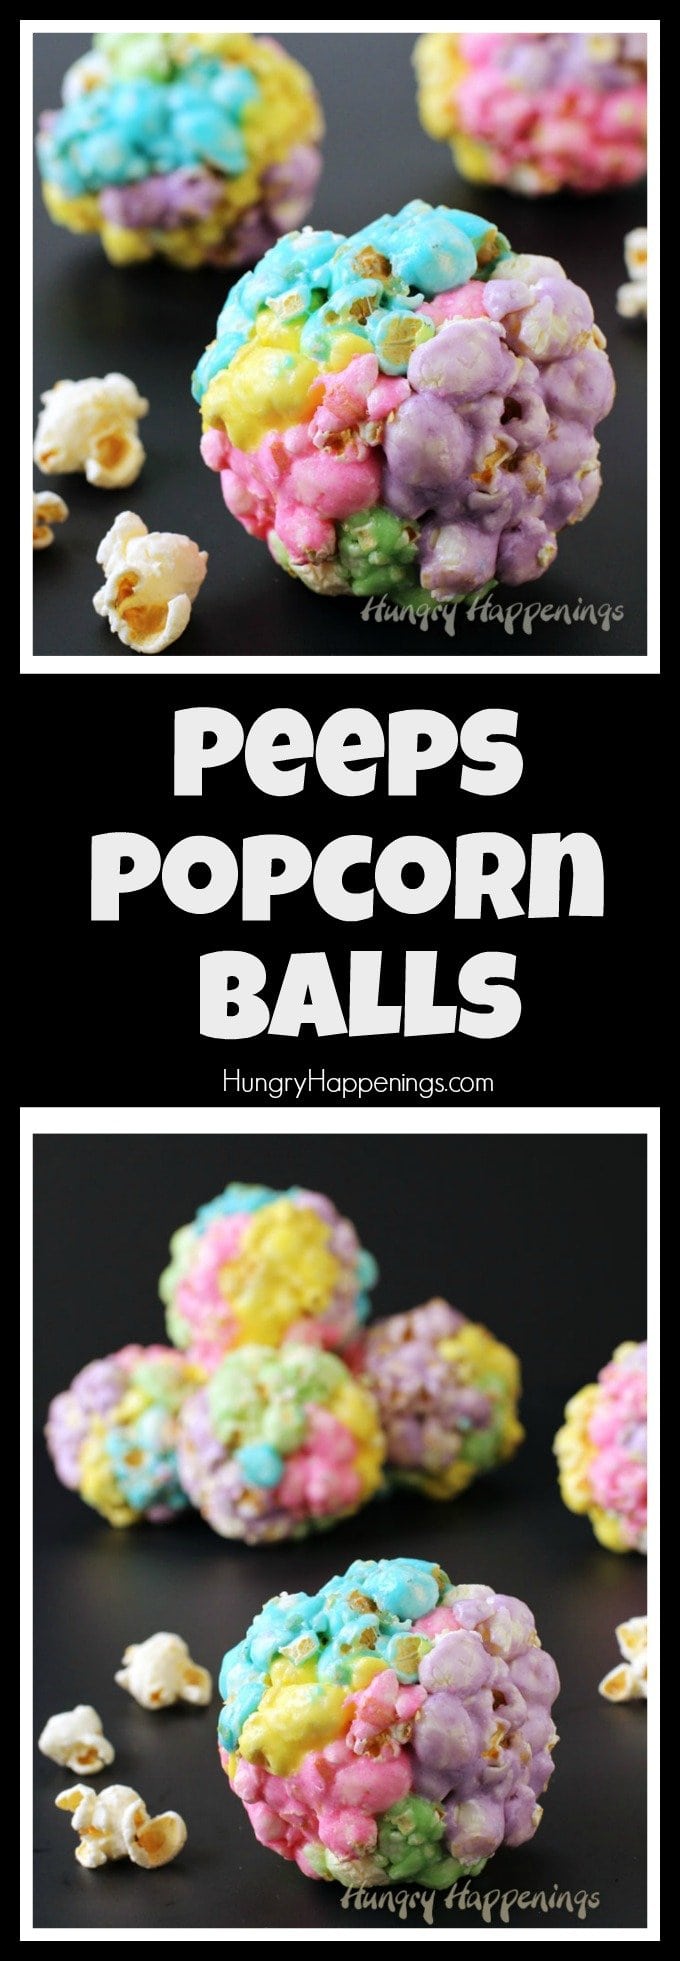 Multi-colored Peeps Popcorn Balls are simple to make using 3 ingredients and will brighten up your dessert table or basket this Easter. 